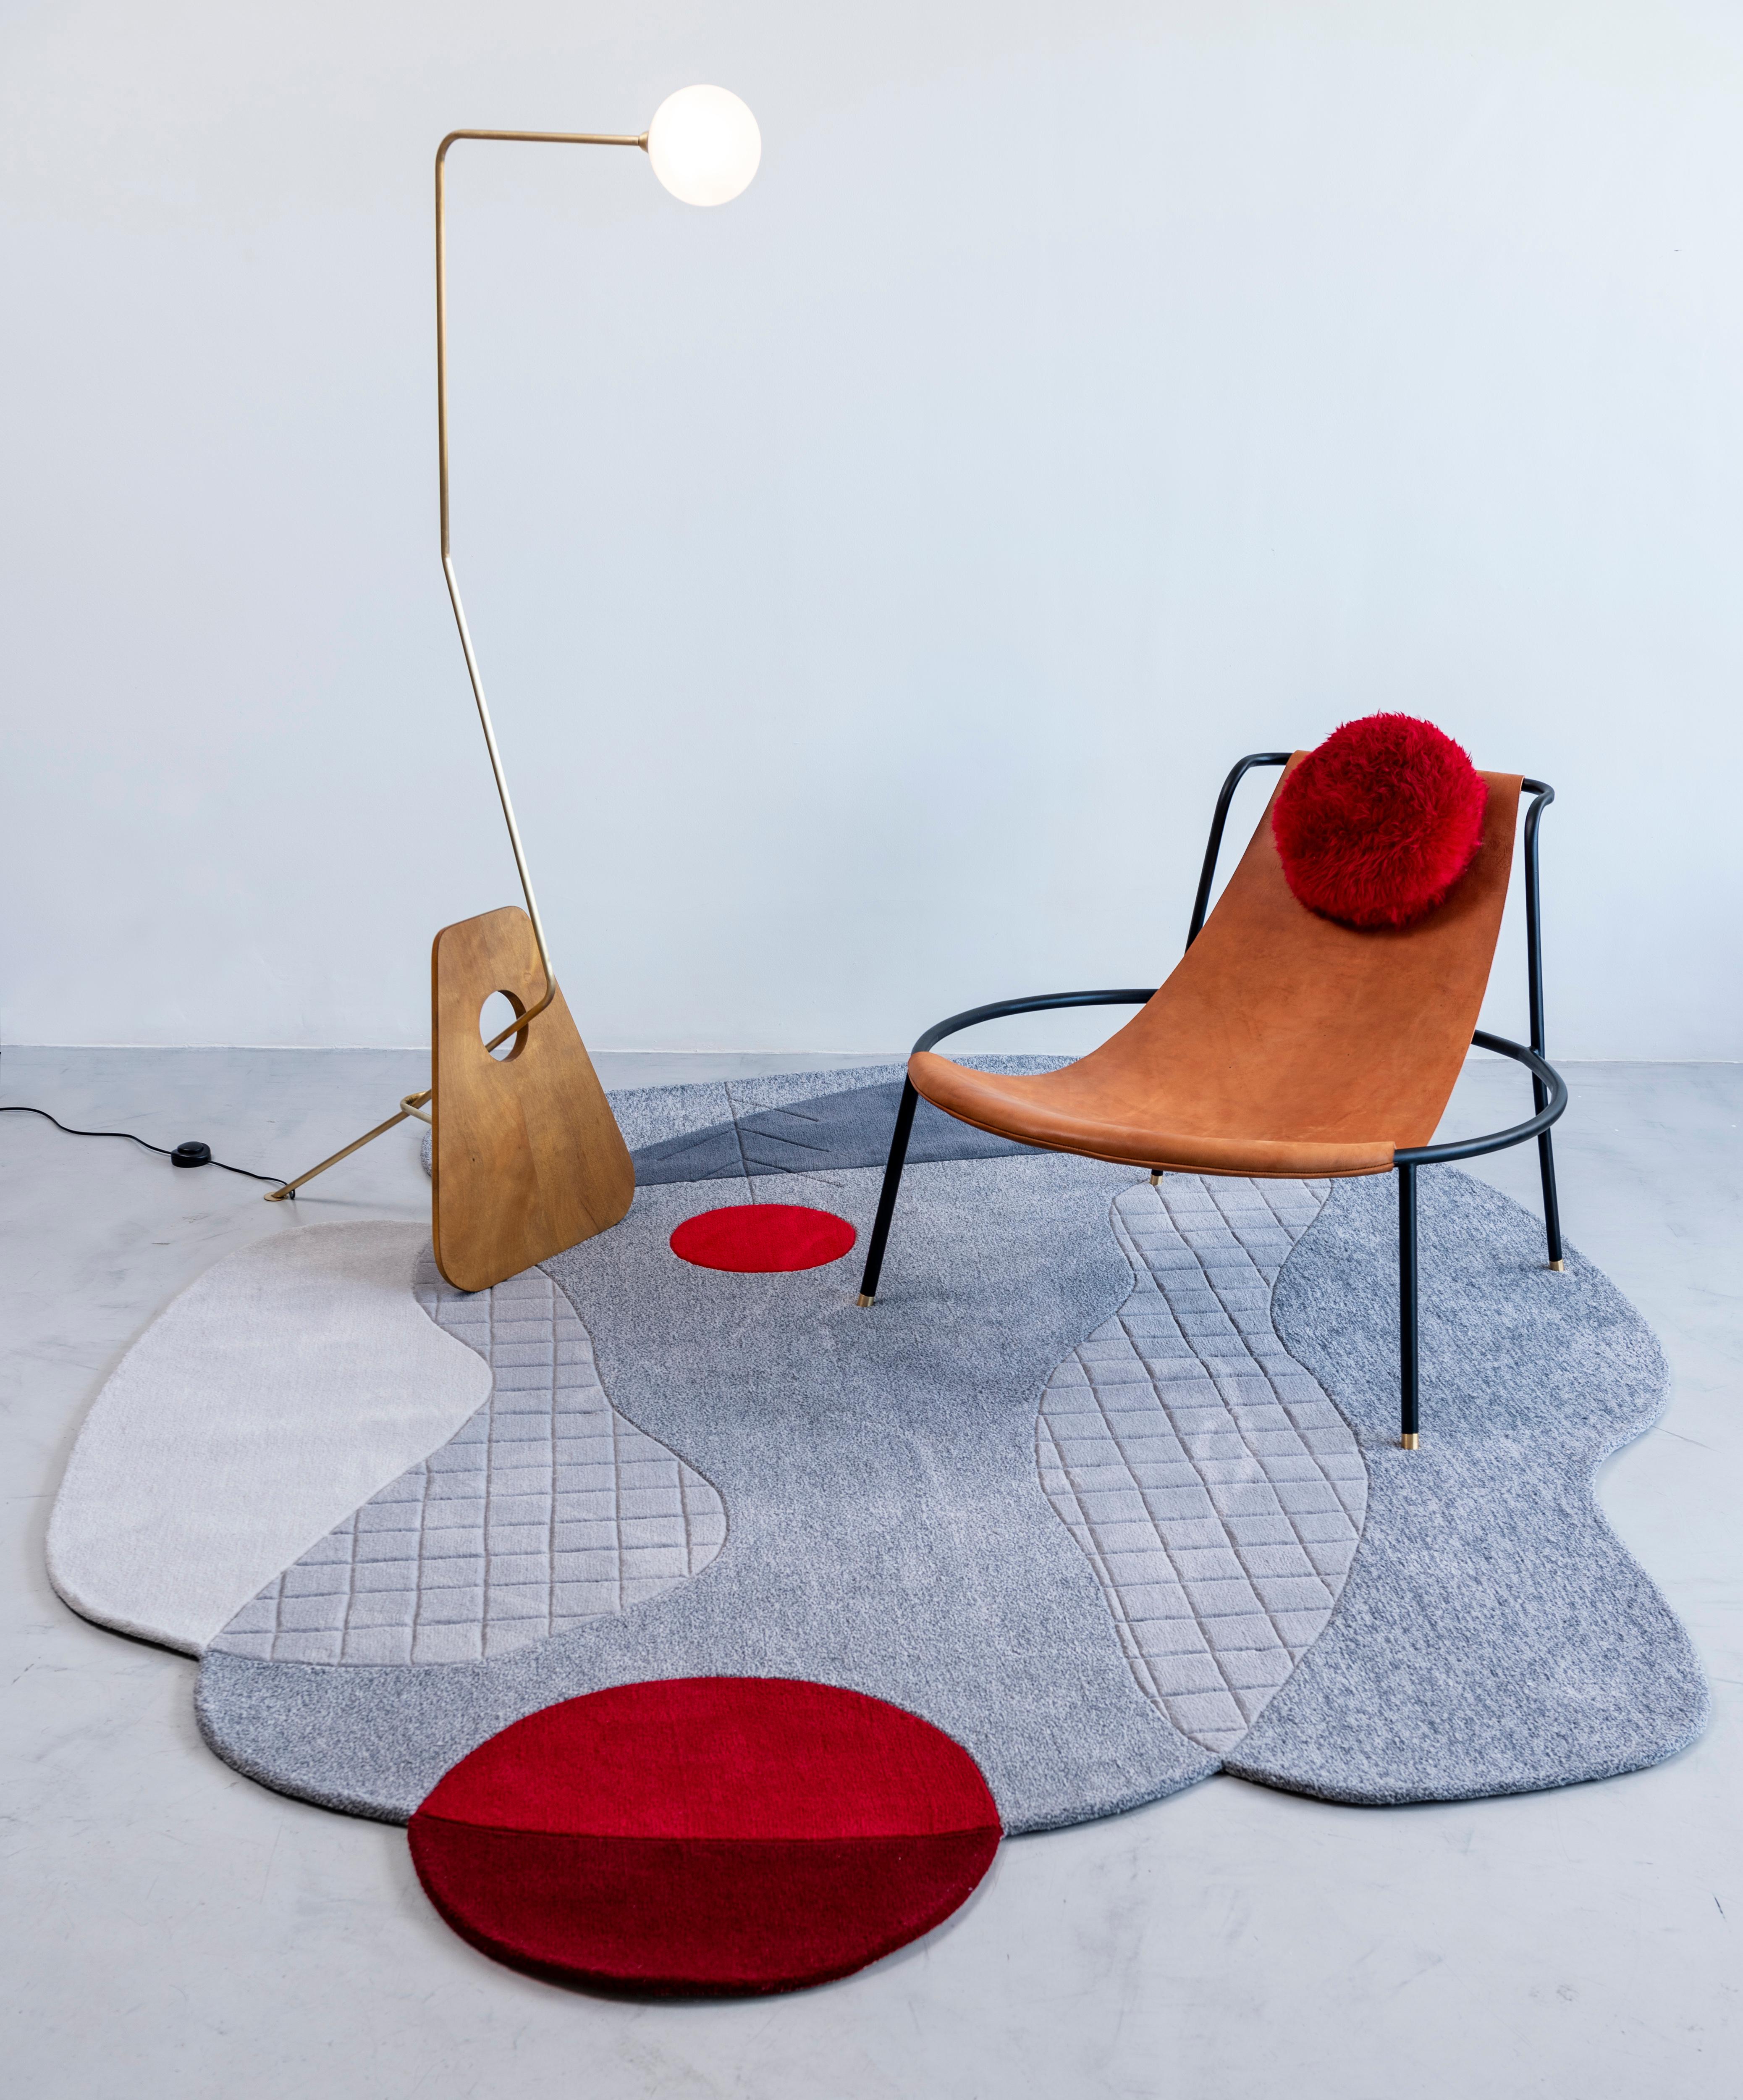 The iconic SESC Pompéia project by Lina Bo Bardi in São Paulo, was the great inspiration for this project. the rug is composed of the shapes of the windows and other architectural elements of the project mentioned. Executed in nylon, it has nuances